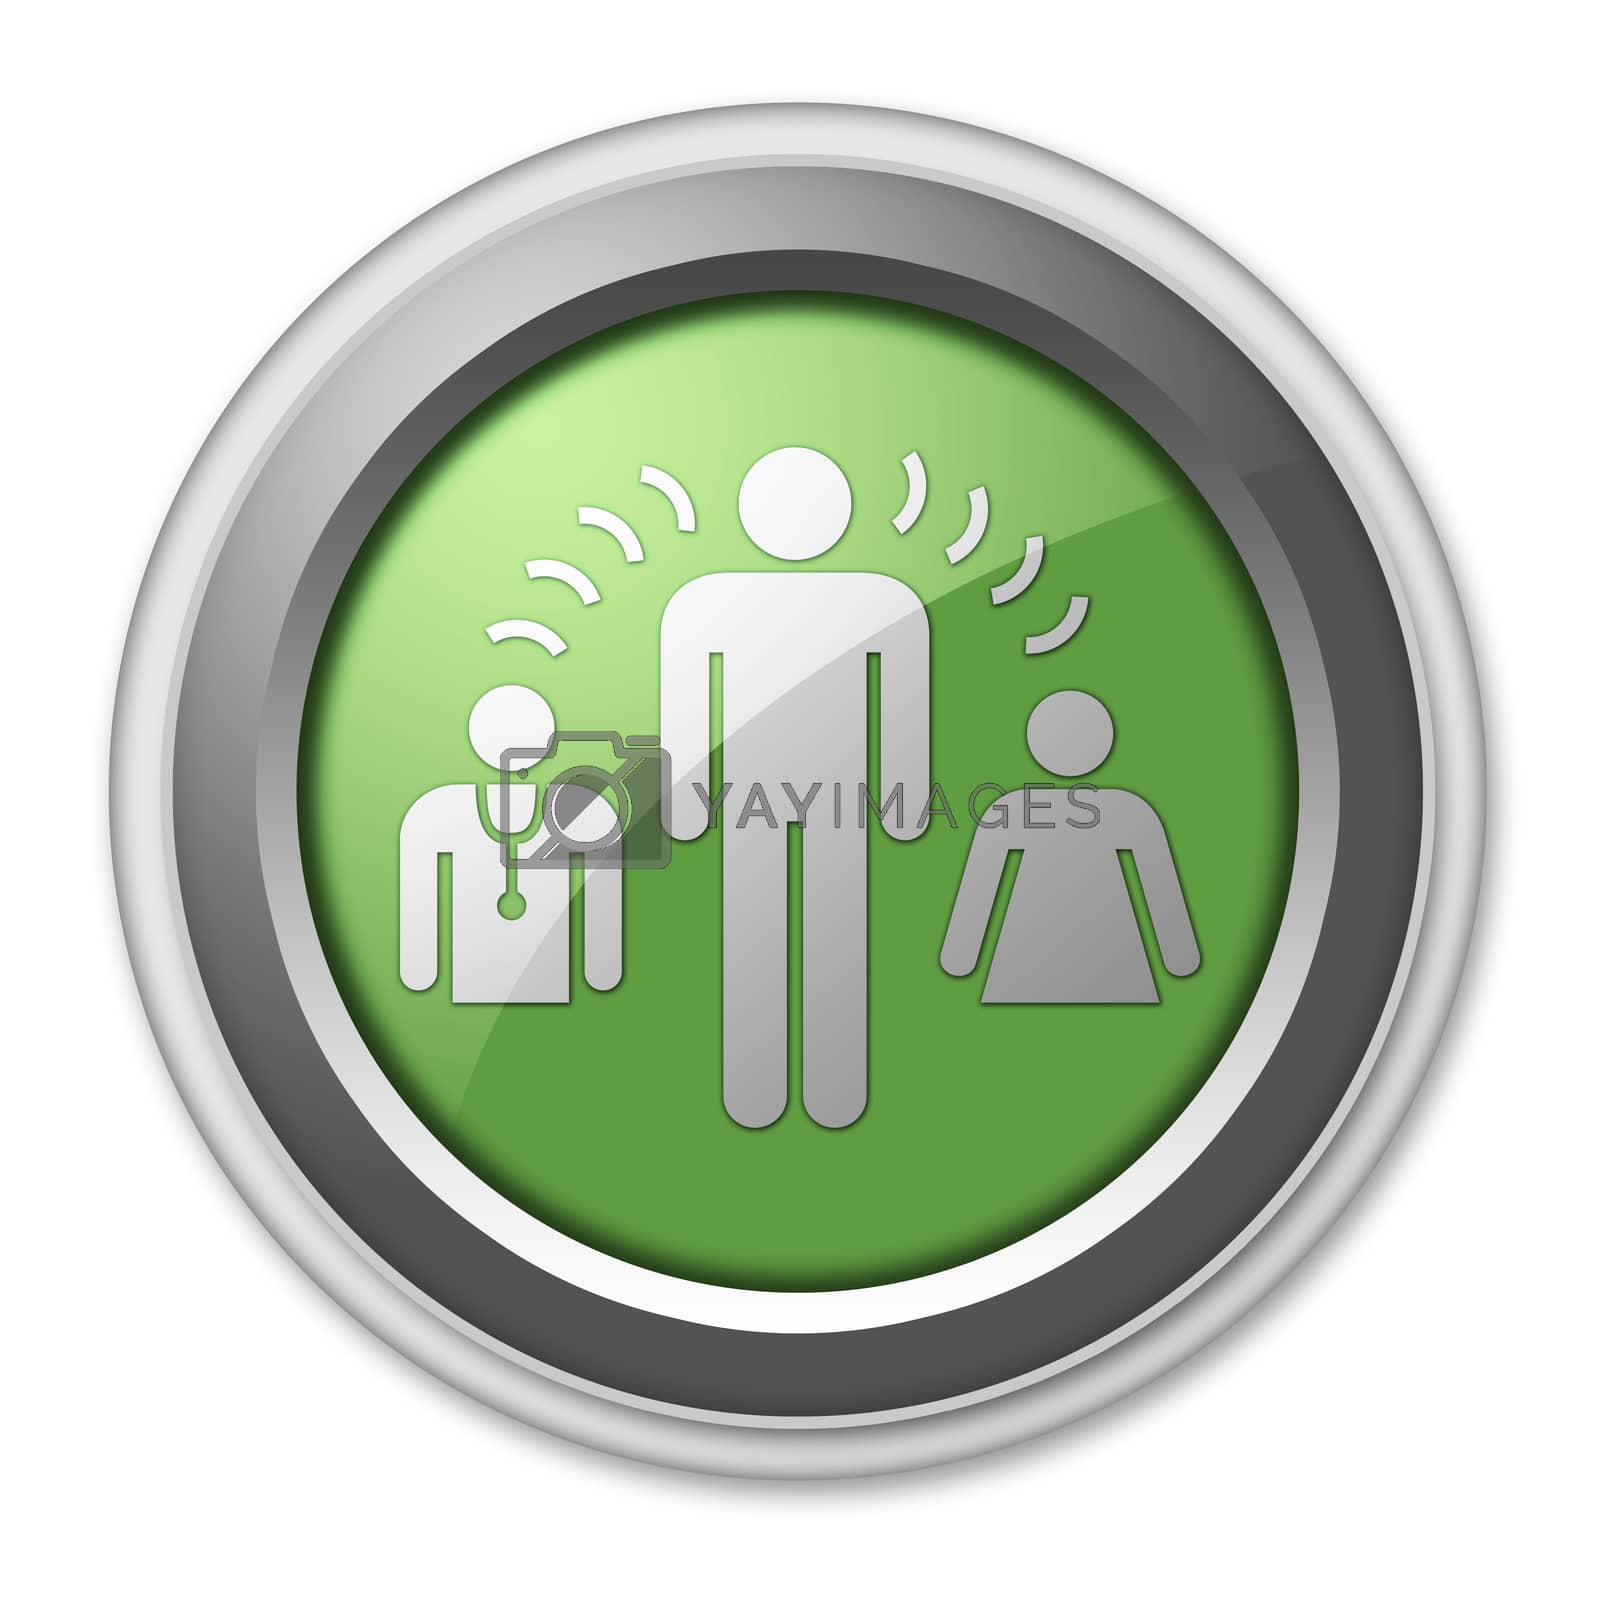 Royalty free image of Icon, Button, Pictogram Interpreter Services by mindscanner